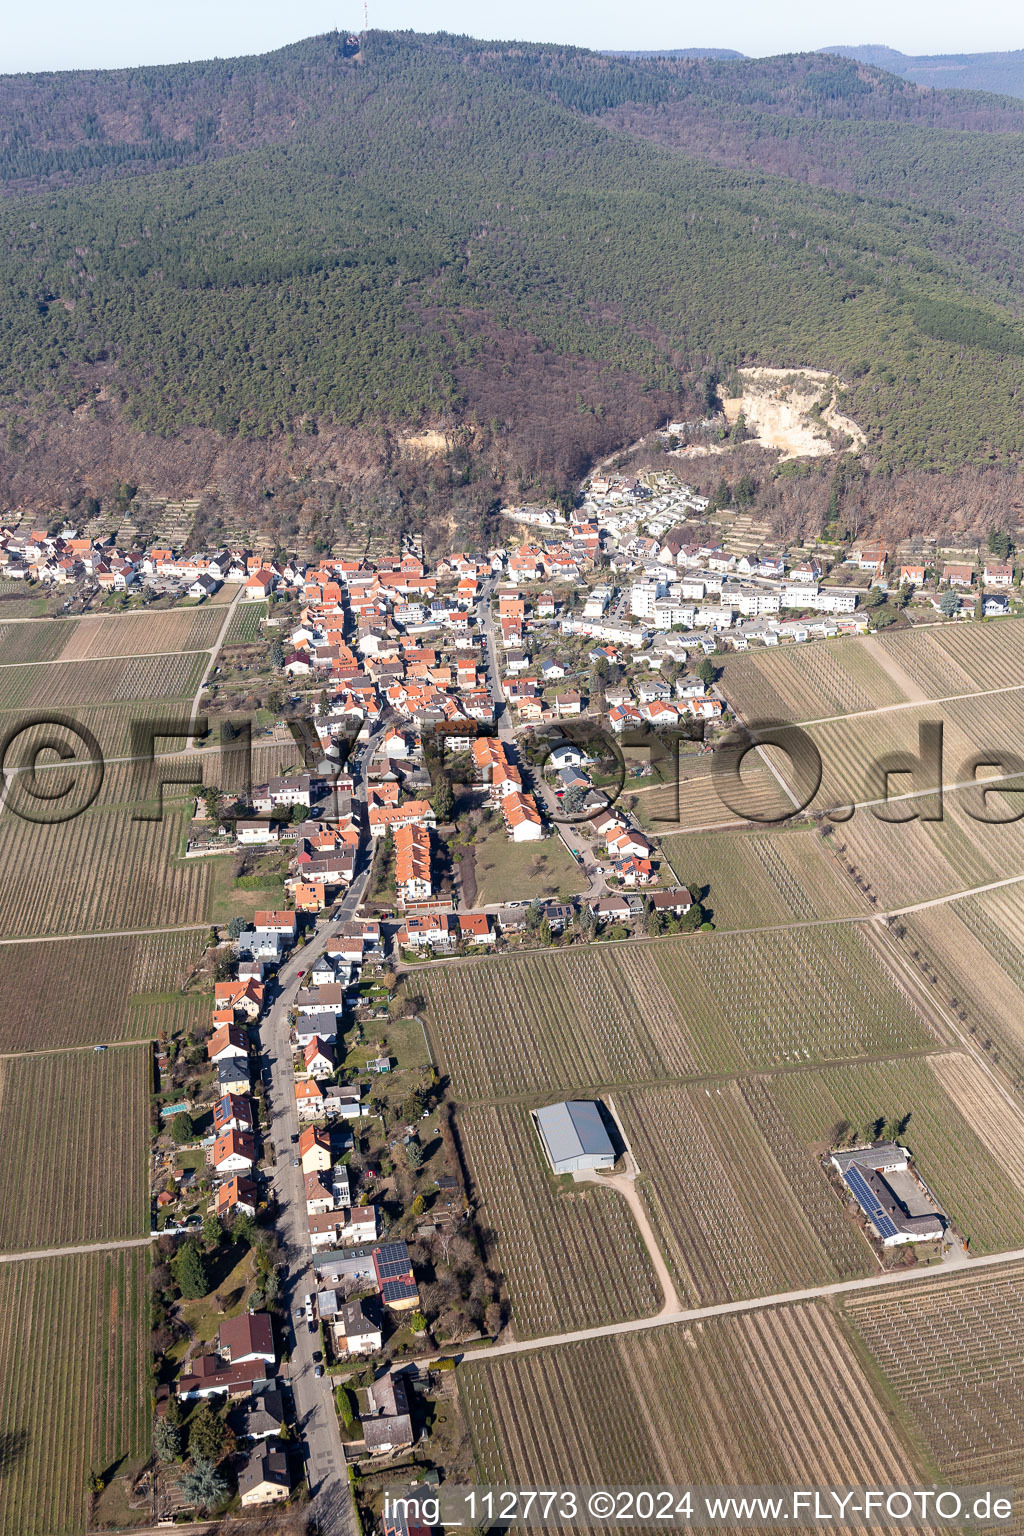 Wine yards surround the settlement area of the village in the district Haardt in Neustadt an der Weinstrasse in the state Rhineland-Palatinate, Germany